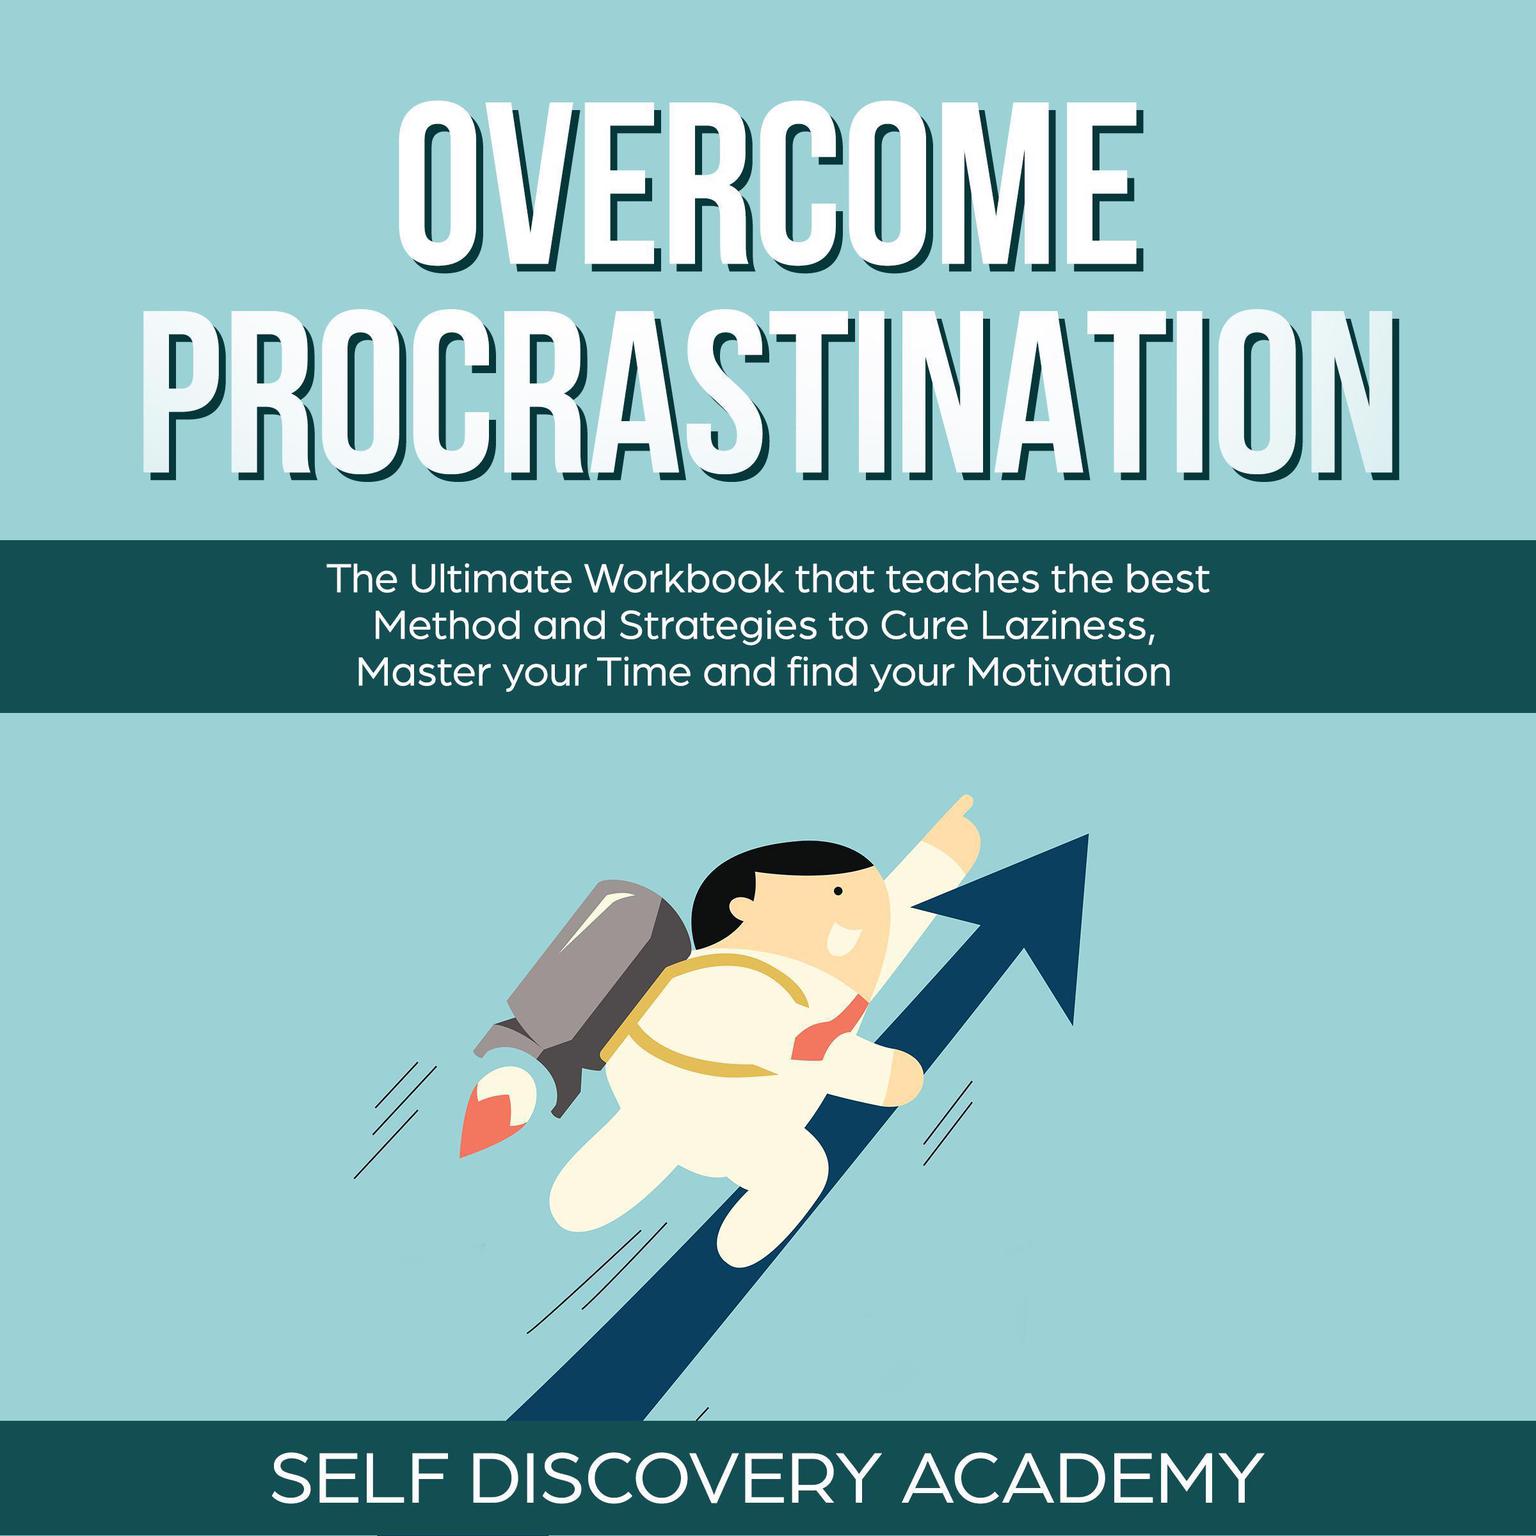 Overcome Procrastination: The Ultimate Workbook that teaches the best Method and Strategies to Cure Laziness, Master your Time and find your Motivation (Abridged) Audiobook, by Self Discovery Academy